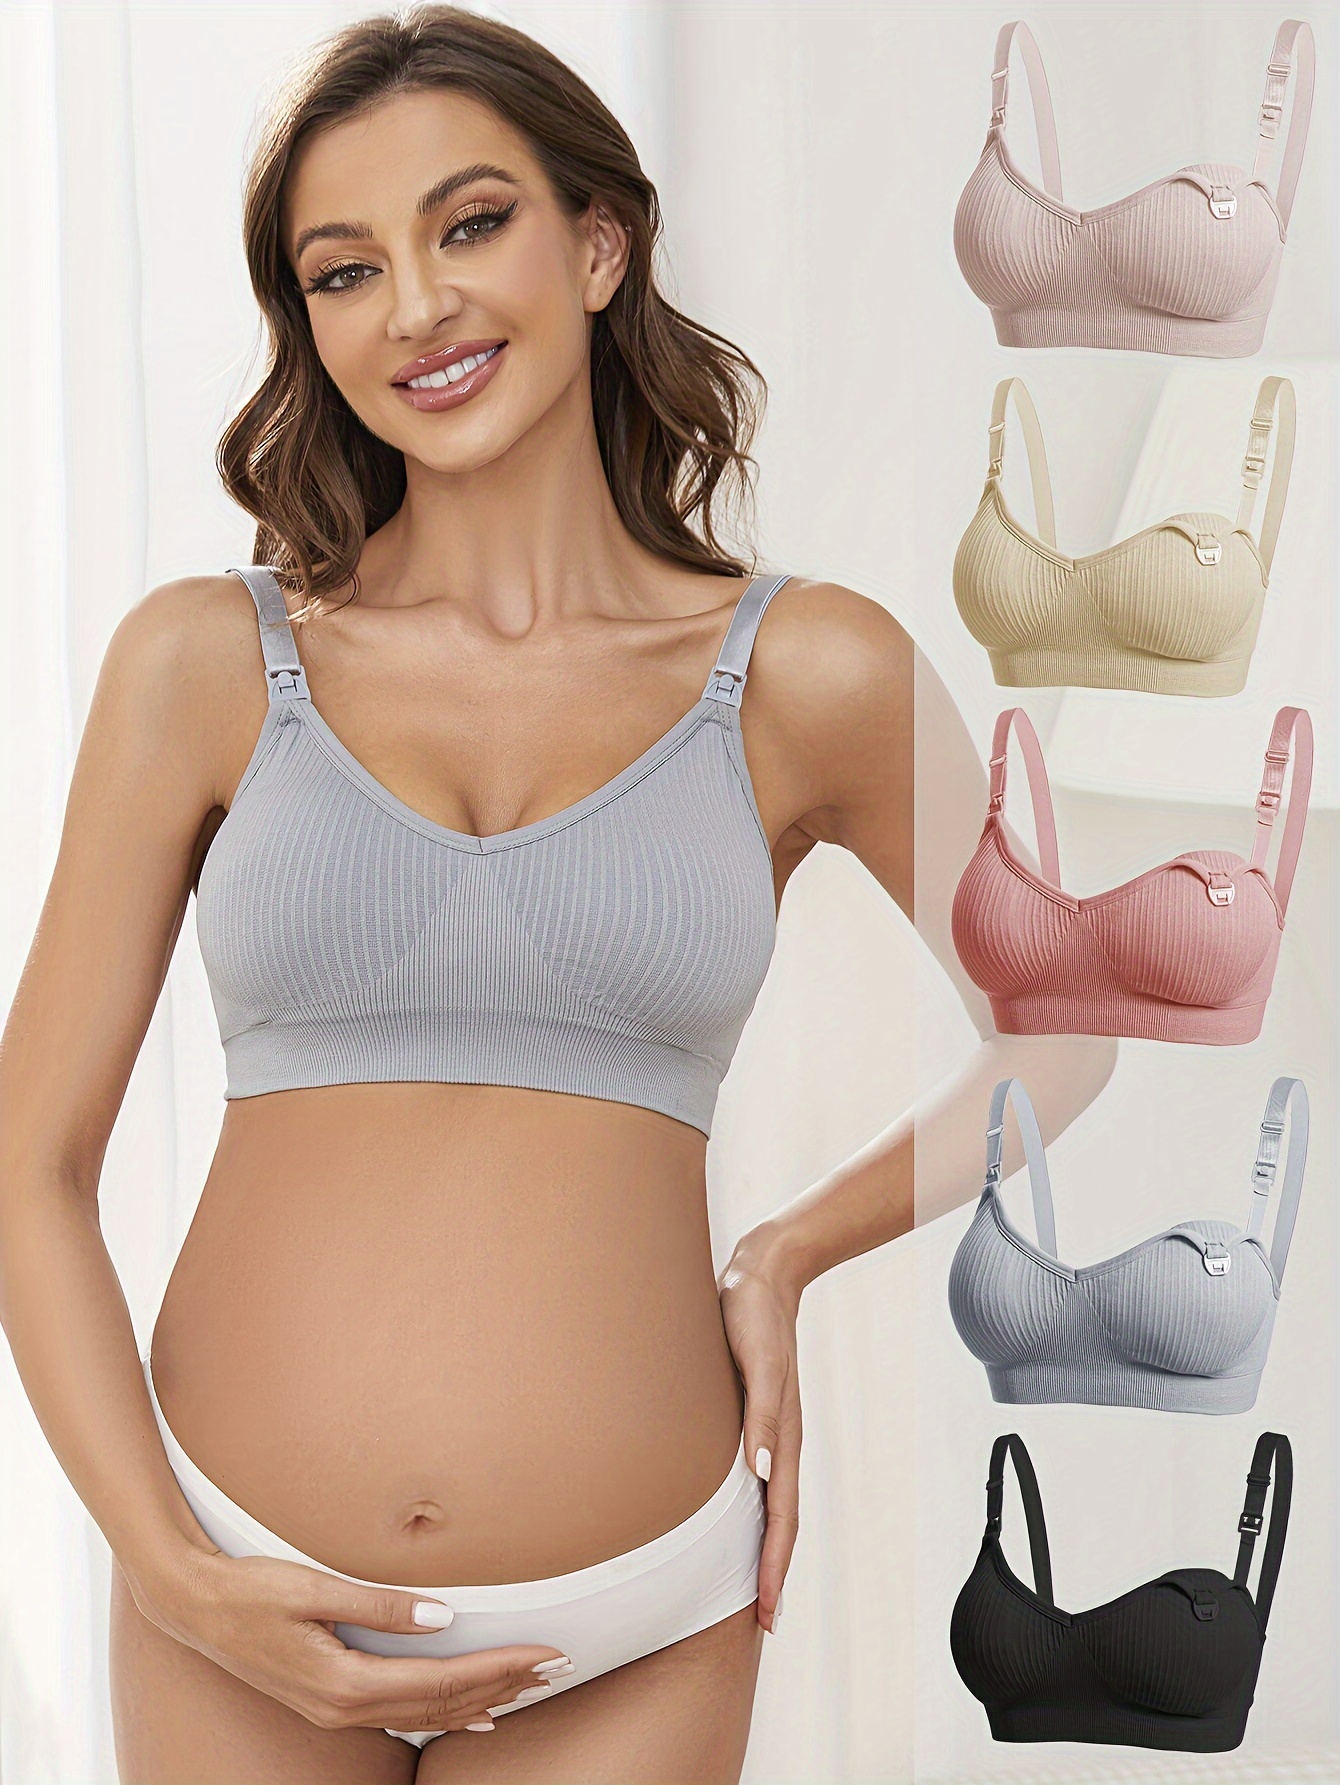 Pregnant Women's Nursing Bras, Open Front Button Checkered Supportive  Breastfeeding Comfy Maternity Bra For Daily Comfort